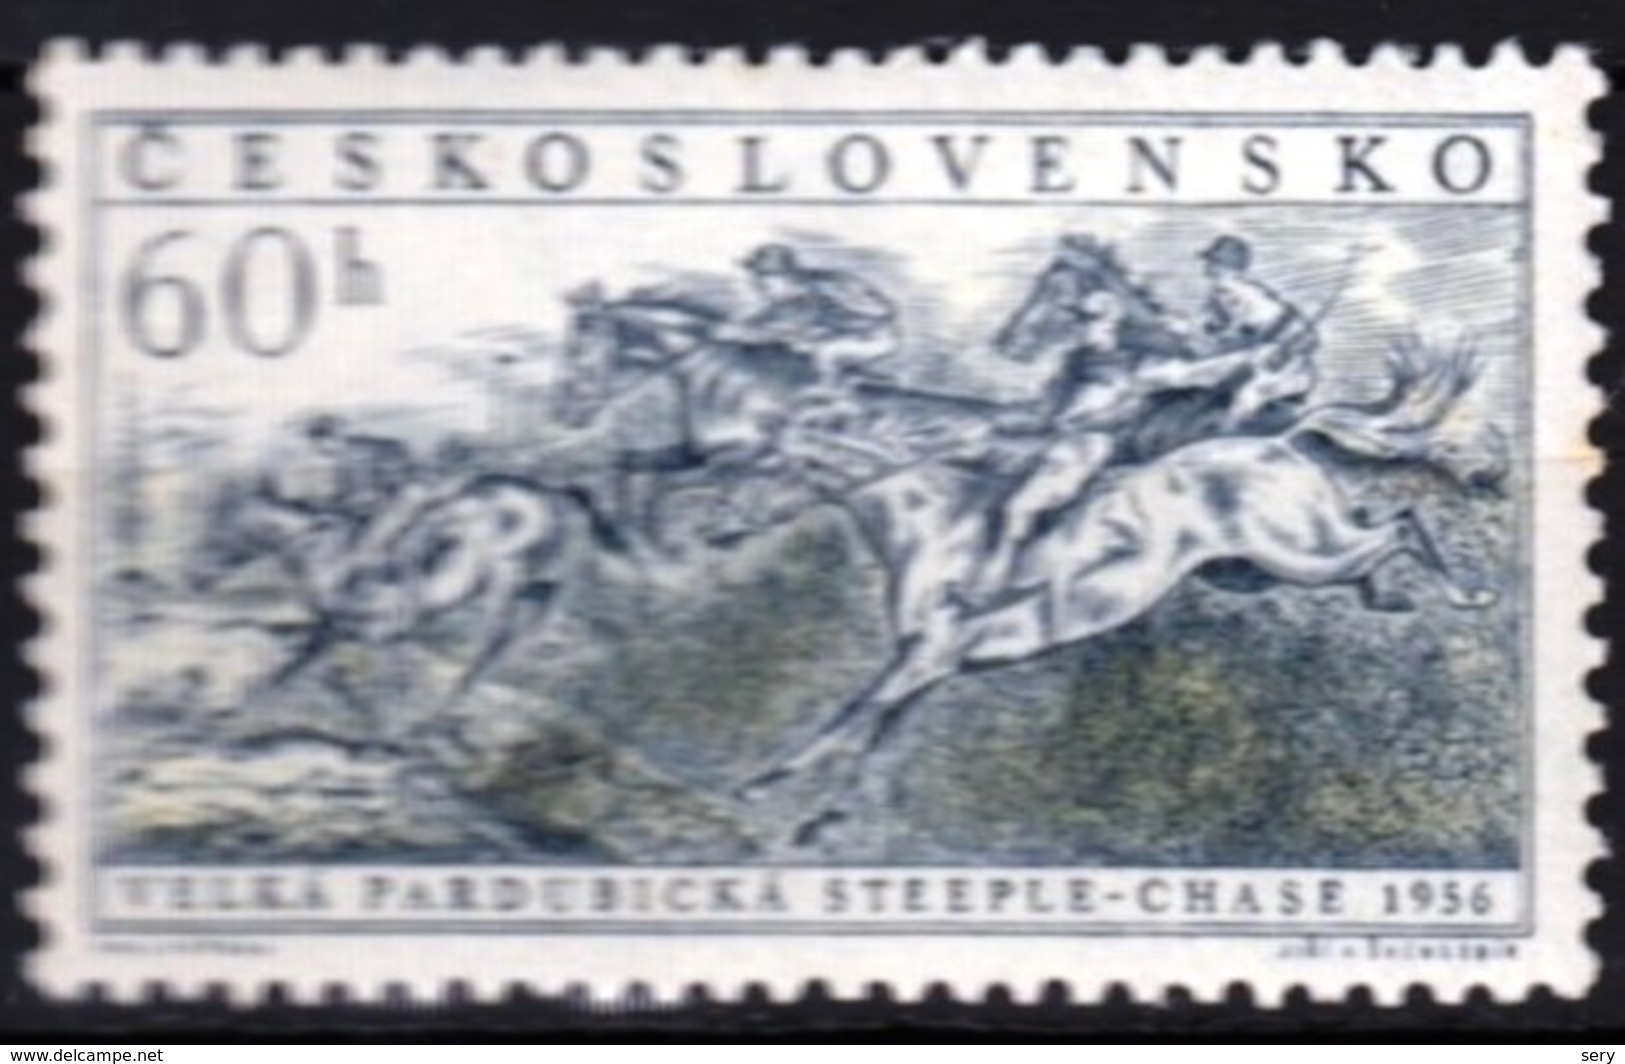 Czechoslovakia 1956 1 V MNH Steeple-chase Equestrian Horse Horses Hippisme Horses Horse Chevaux Cheval Pferd - Ippica